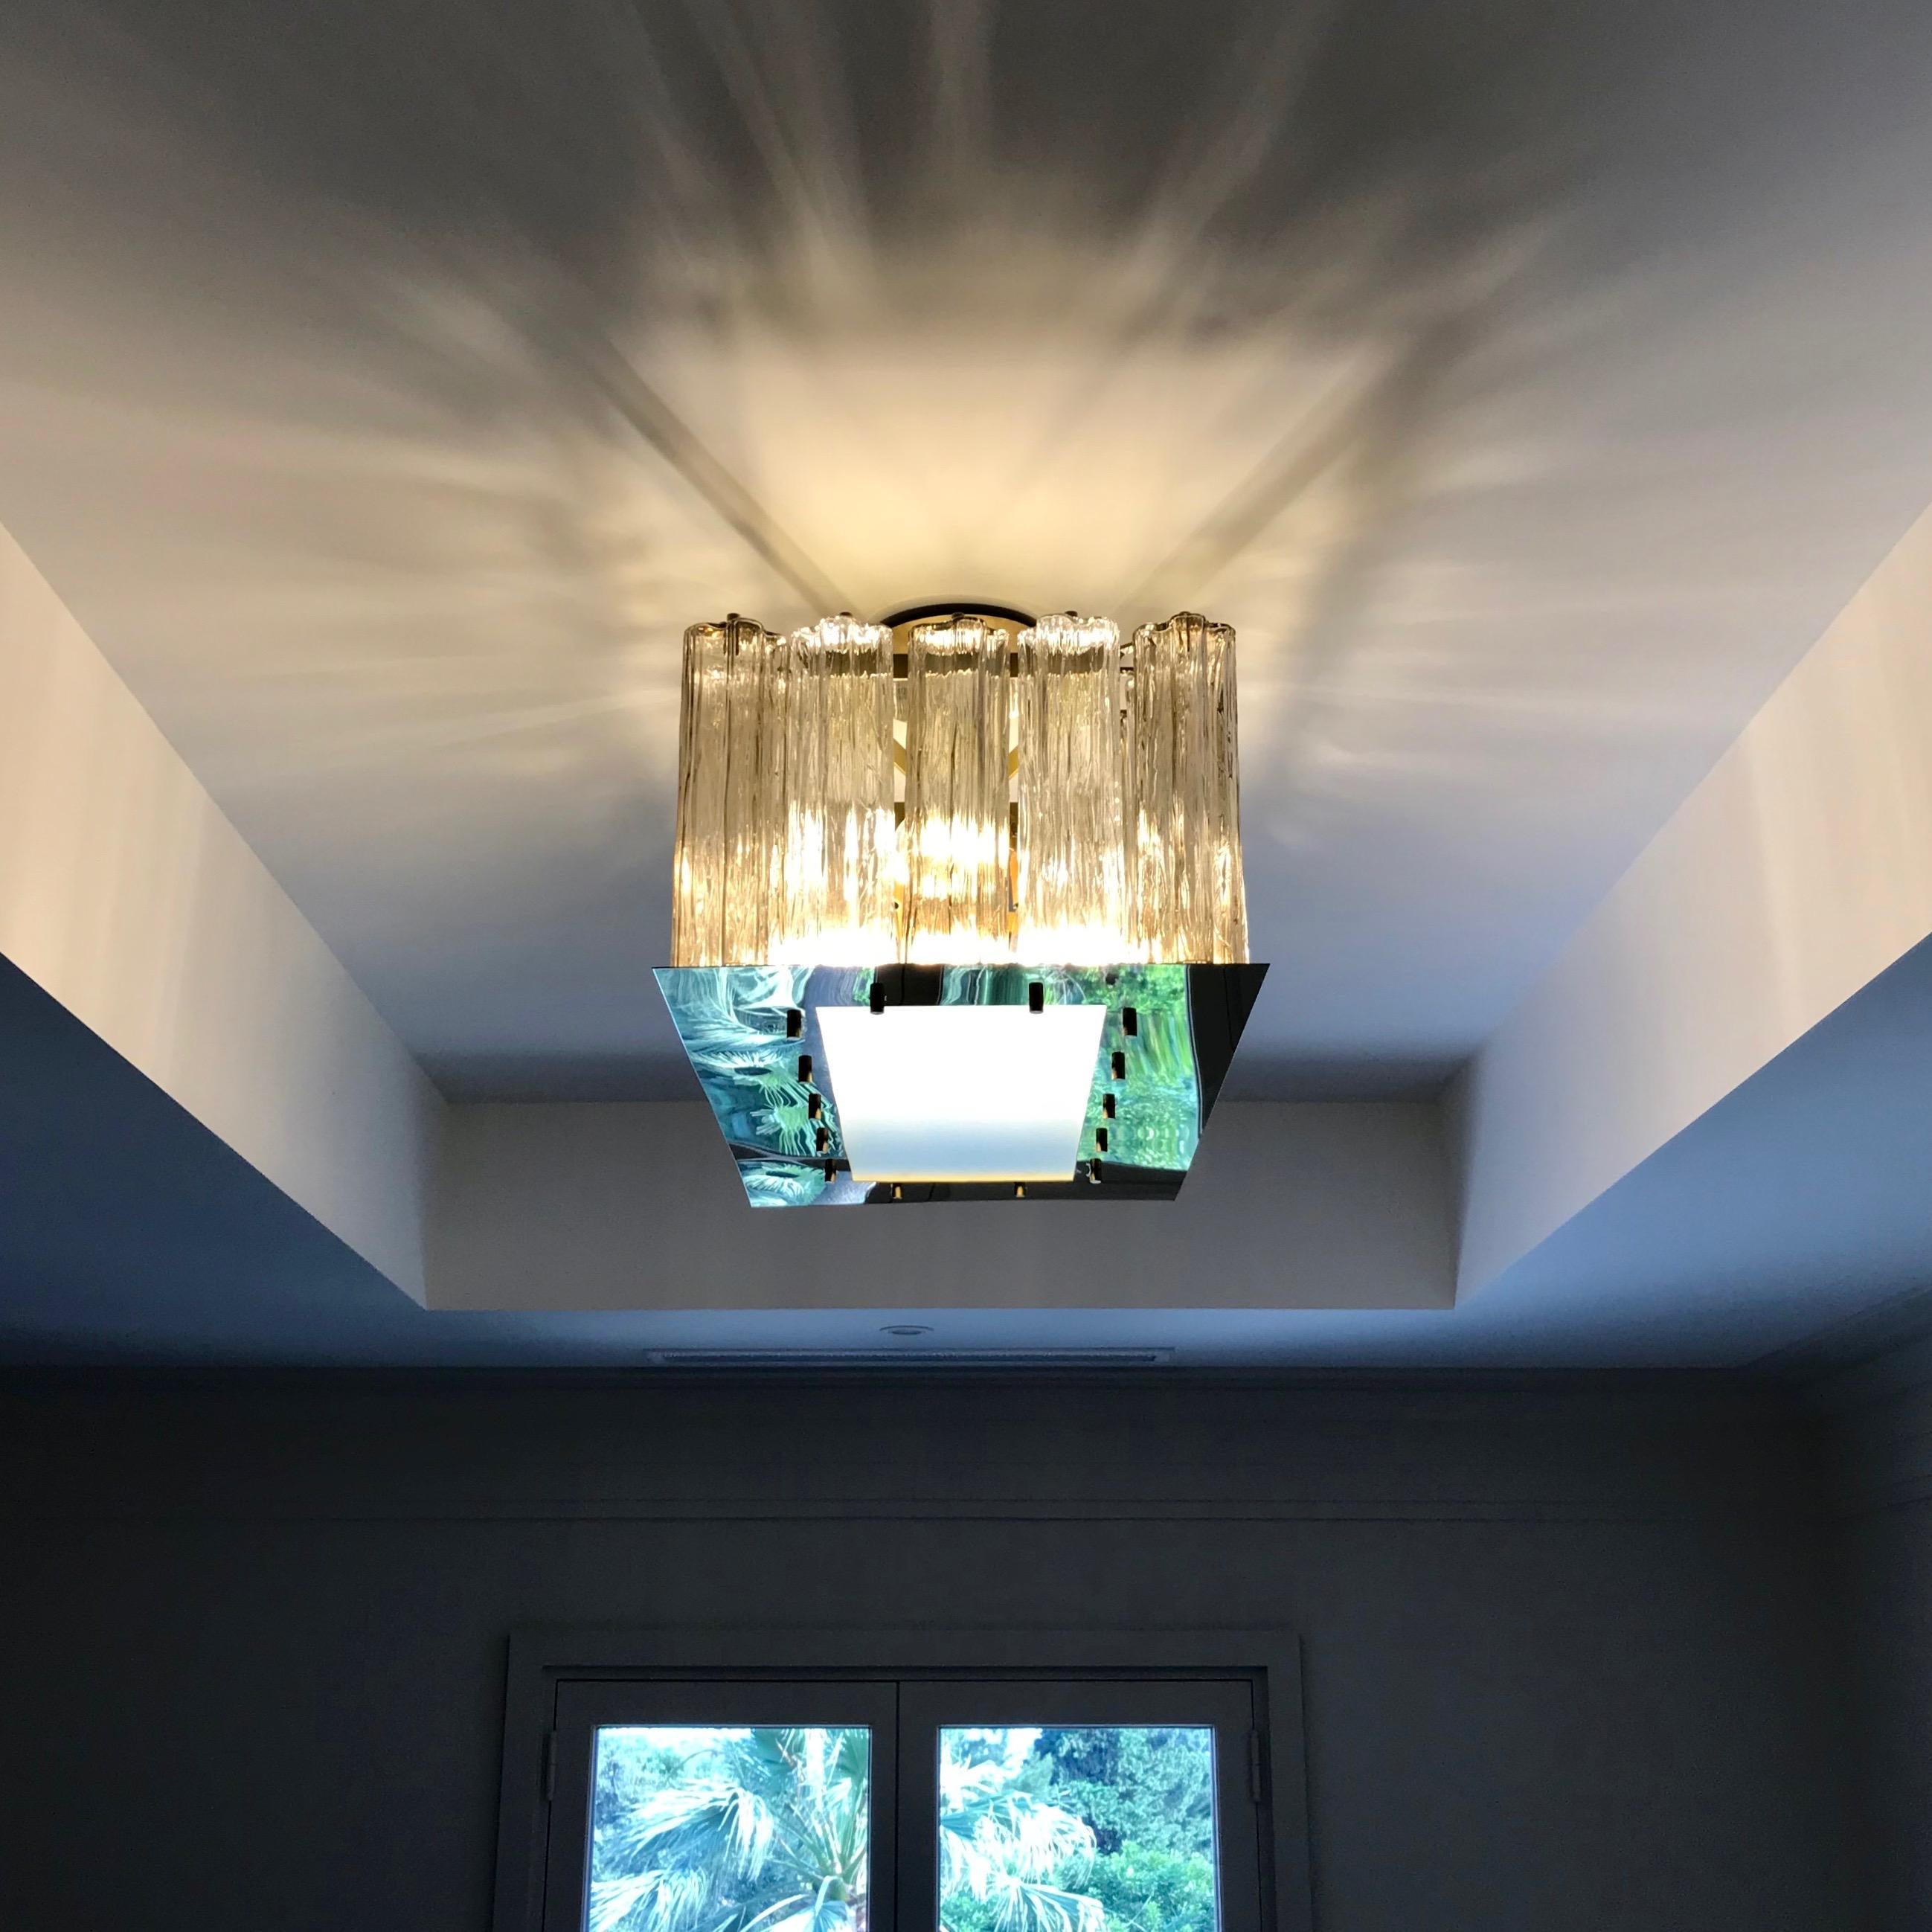 A contemporary Italian bespoke design, entirely handcrafted in Italy, chandelier customizable as flush mounts or pendants, here with a brass structure in a geometric rectangular shape, highlighted and made precious by a brass staging platform that